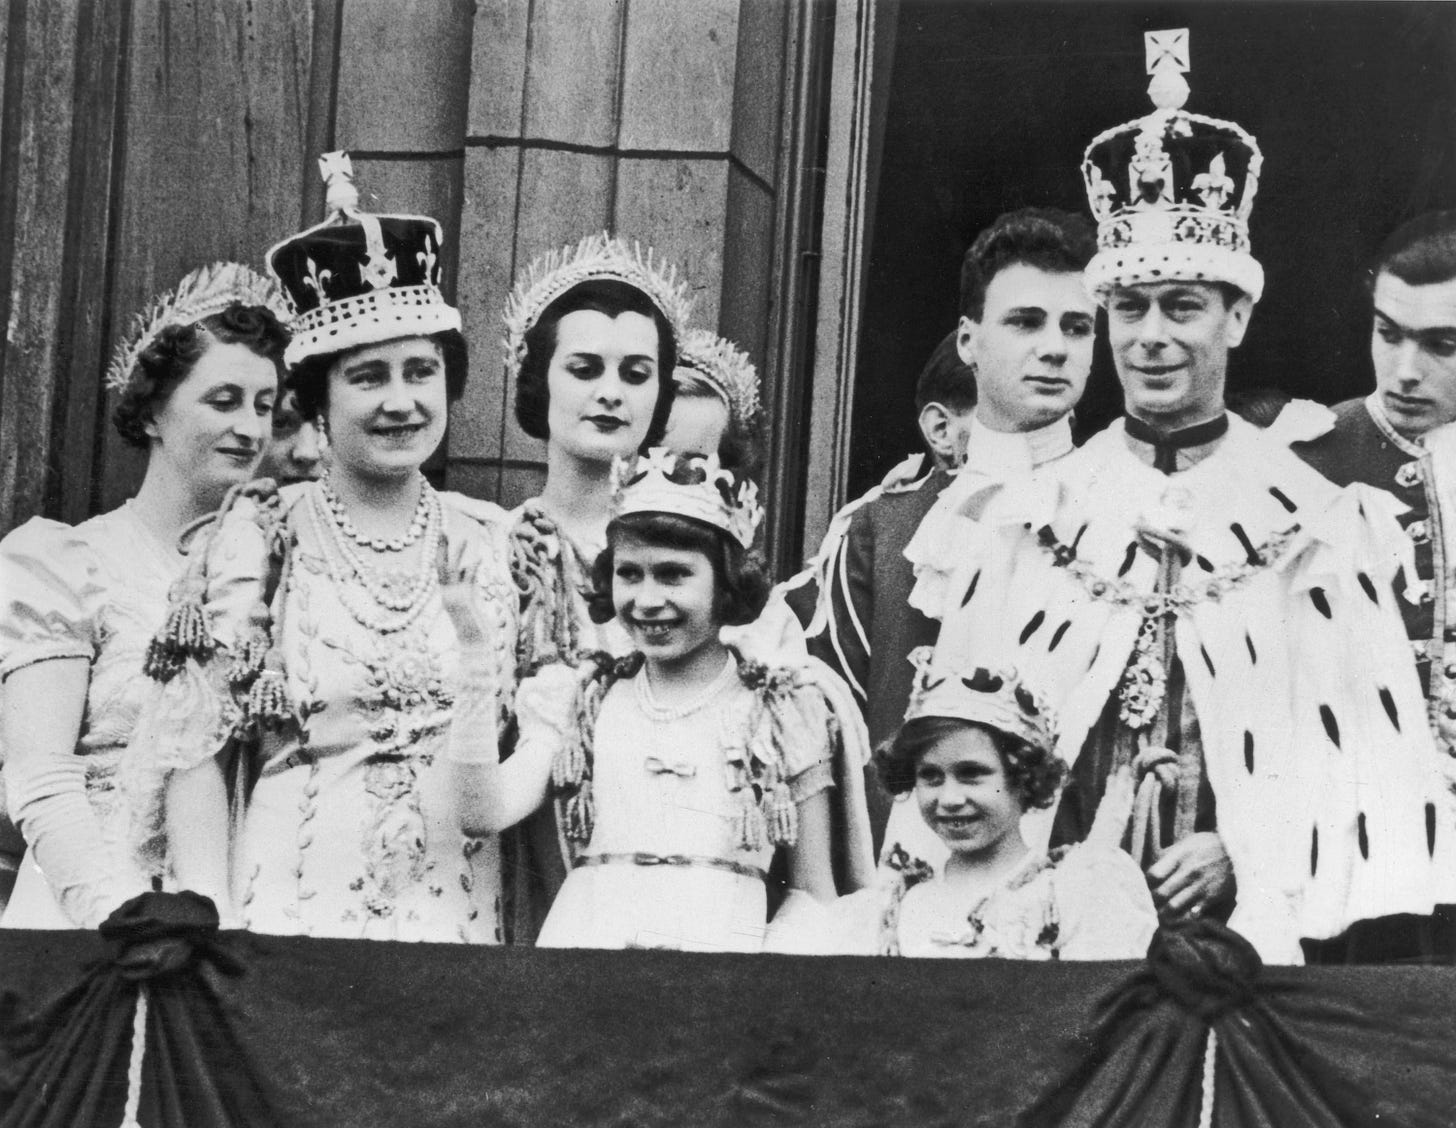 Elizabeth, center, at her father’s coronation in May 1937, six months after his brother abdicated.